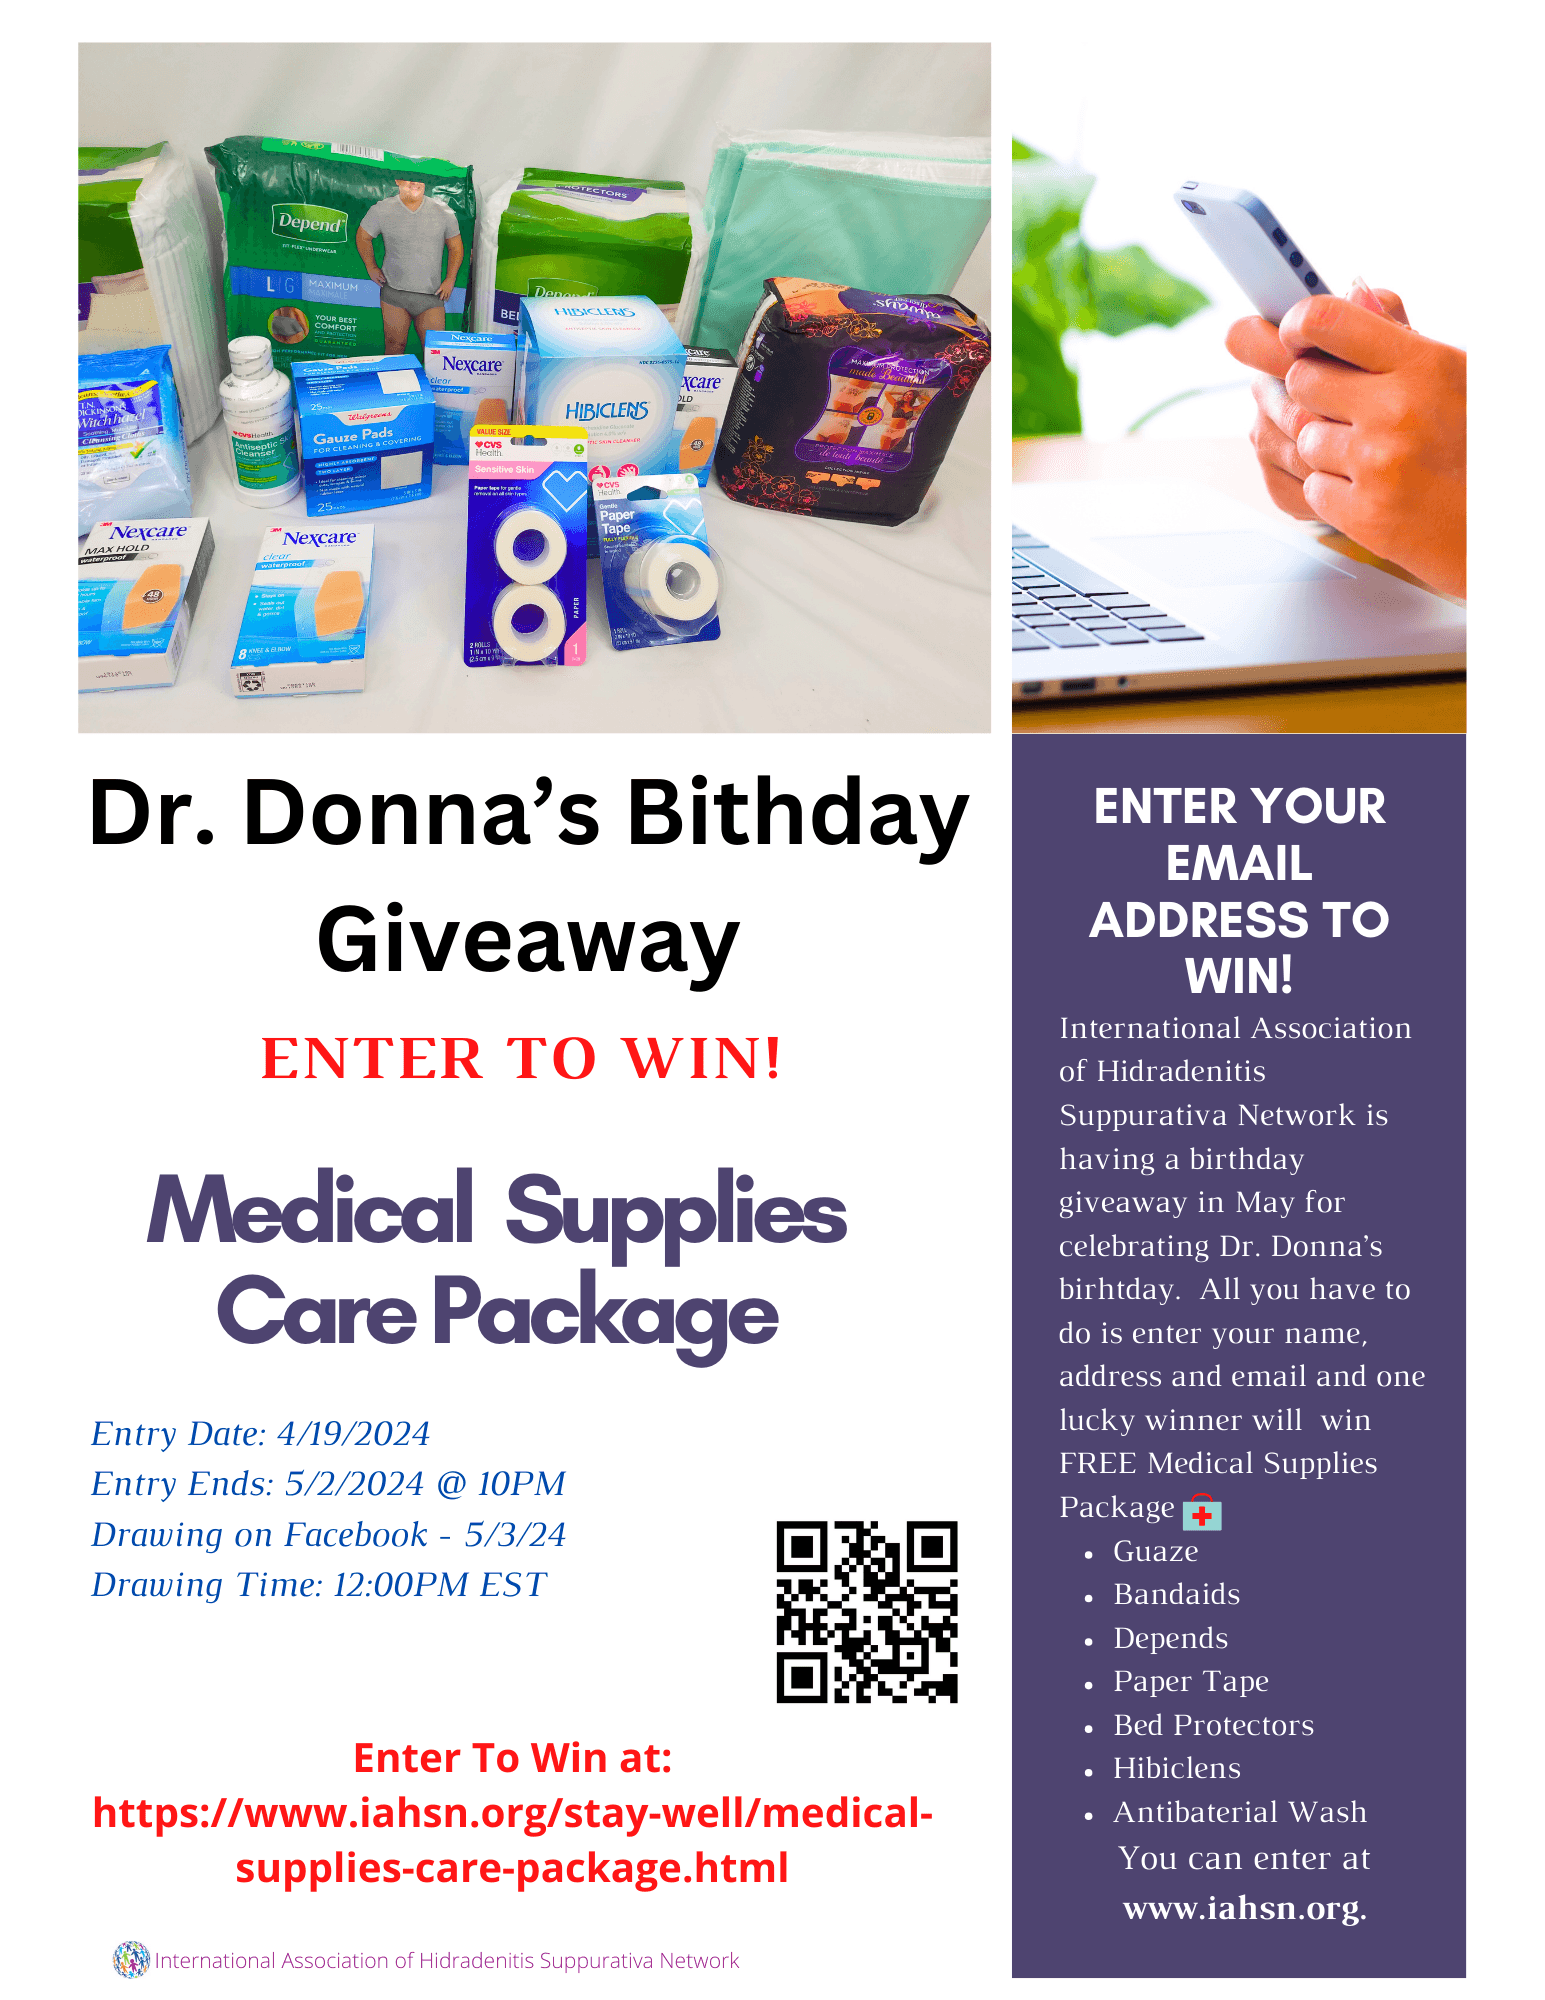 Dr. Donna's Medical Supplies Birthday Give-A-Way